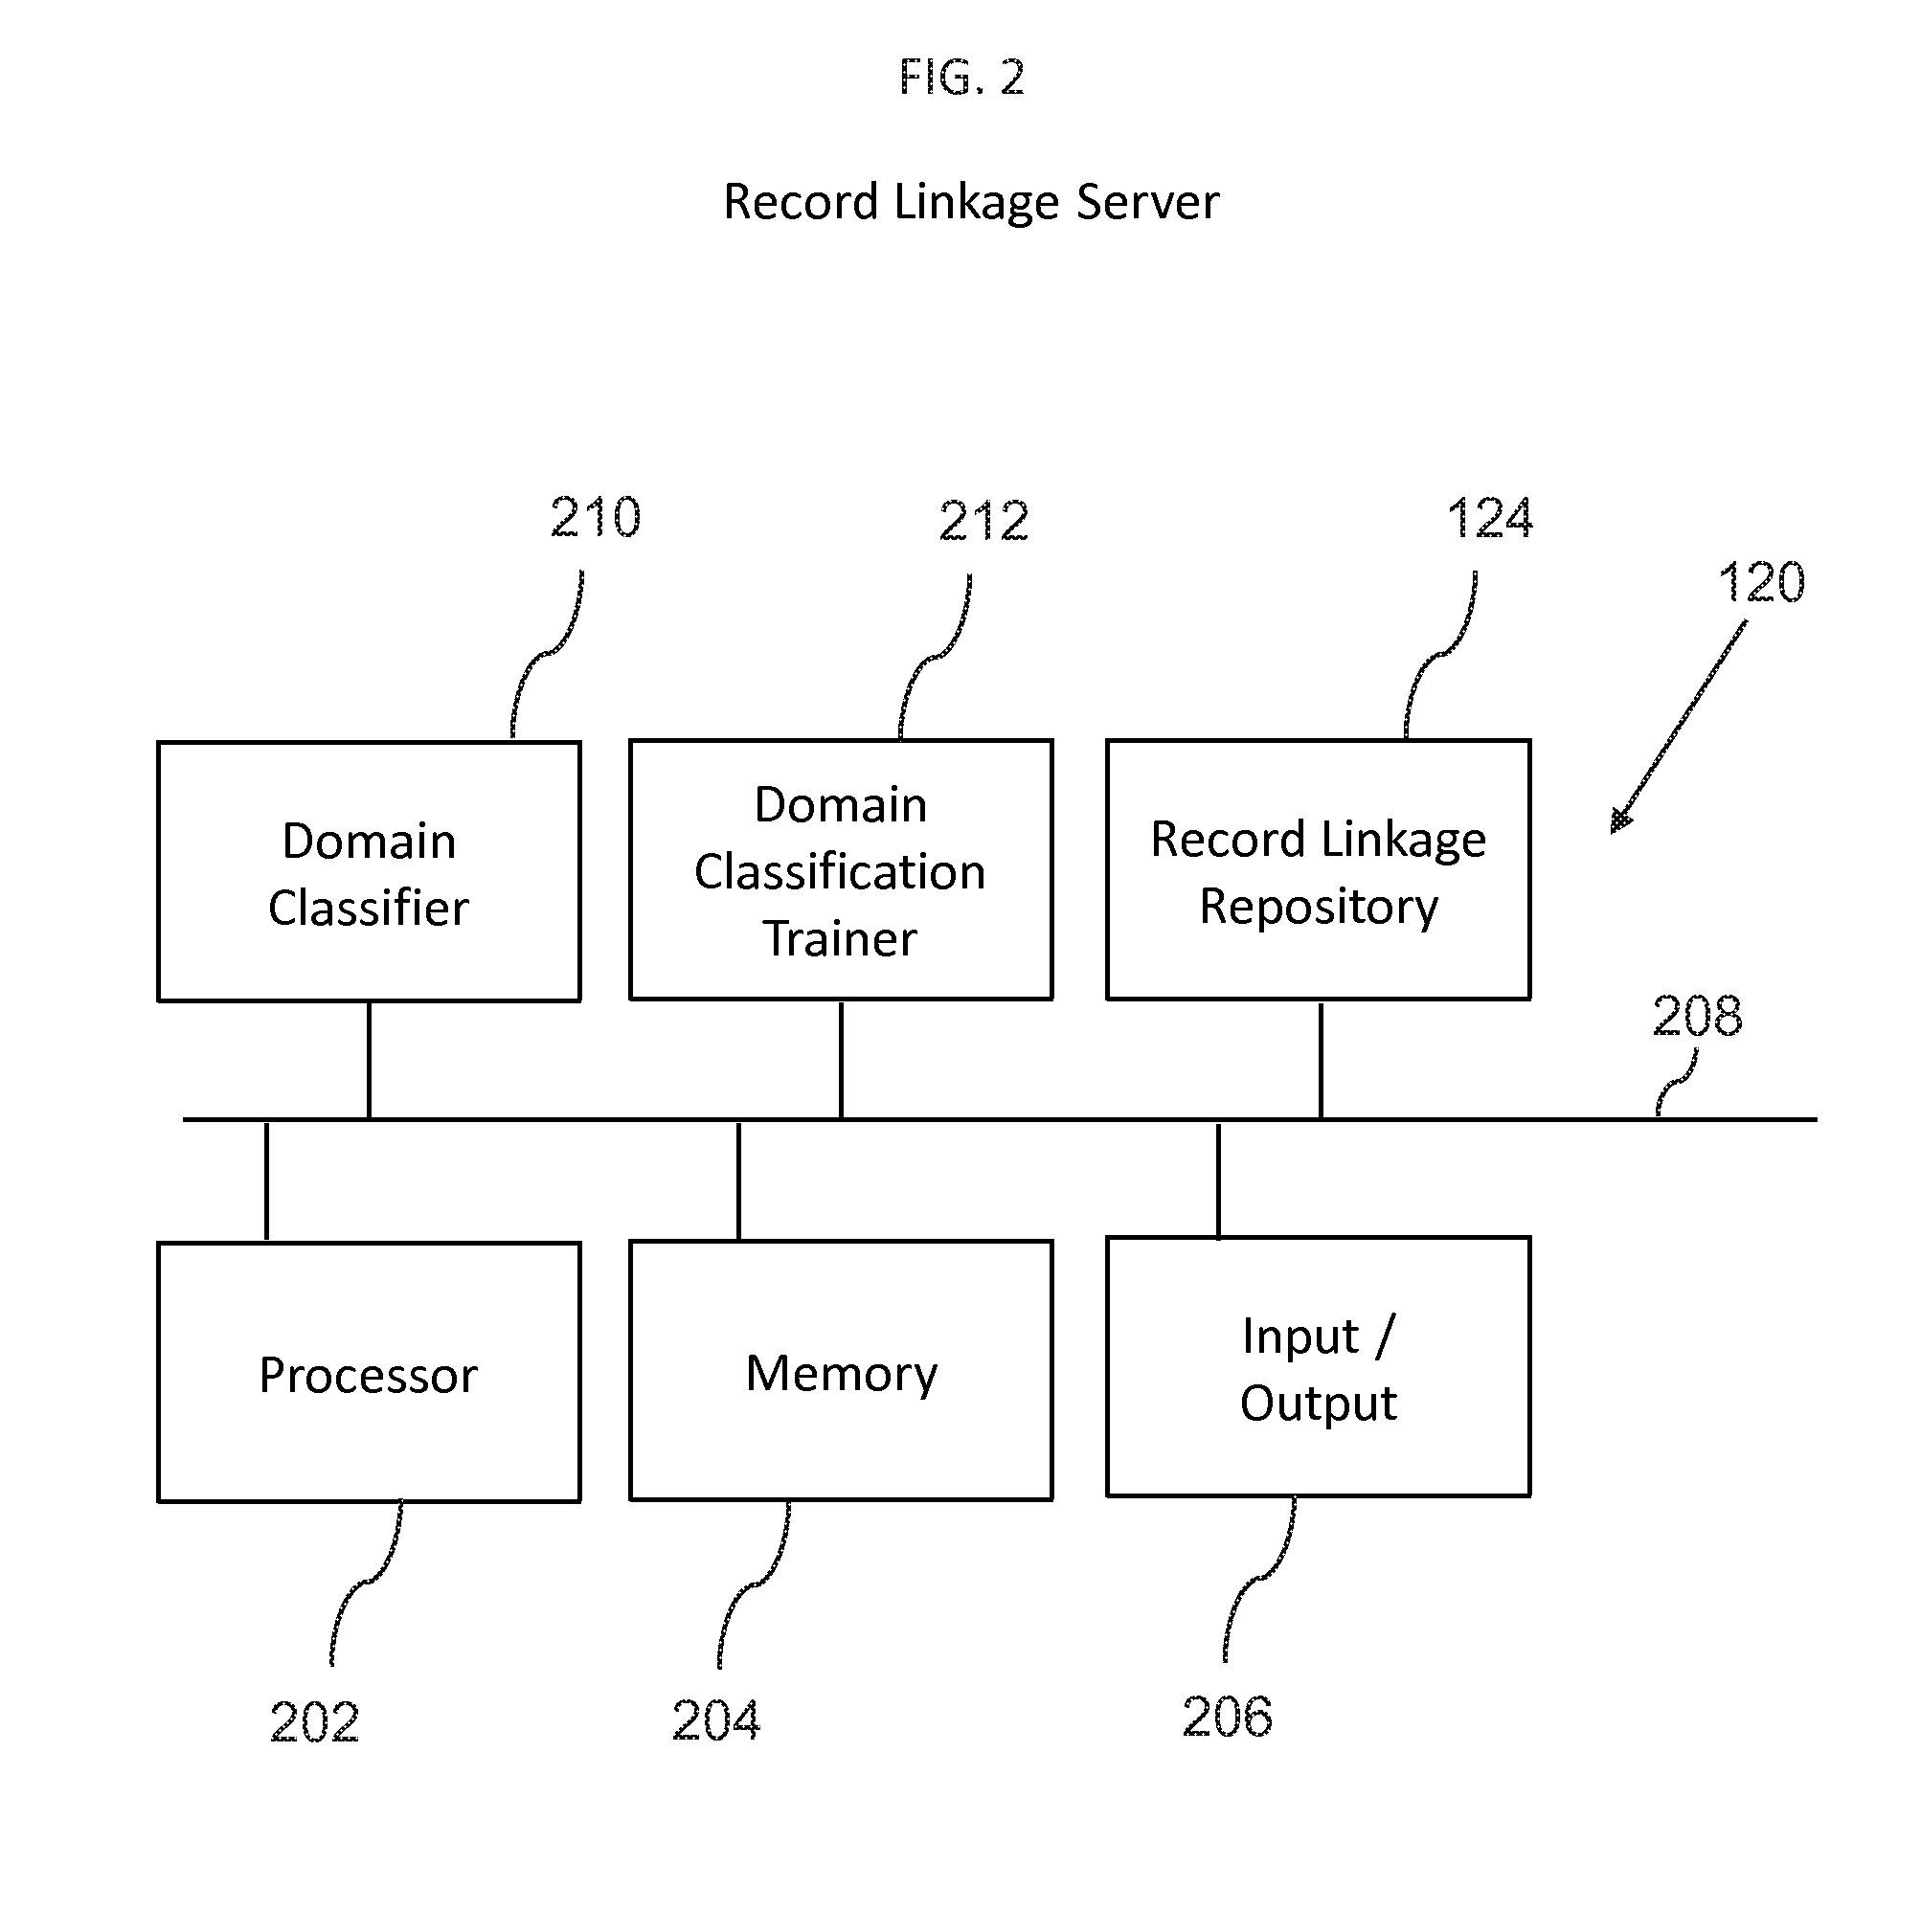 System and method for sharing record linkage information